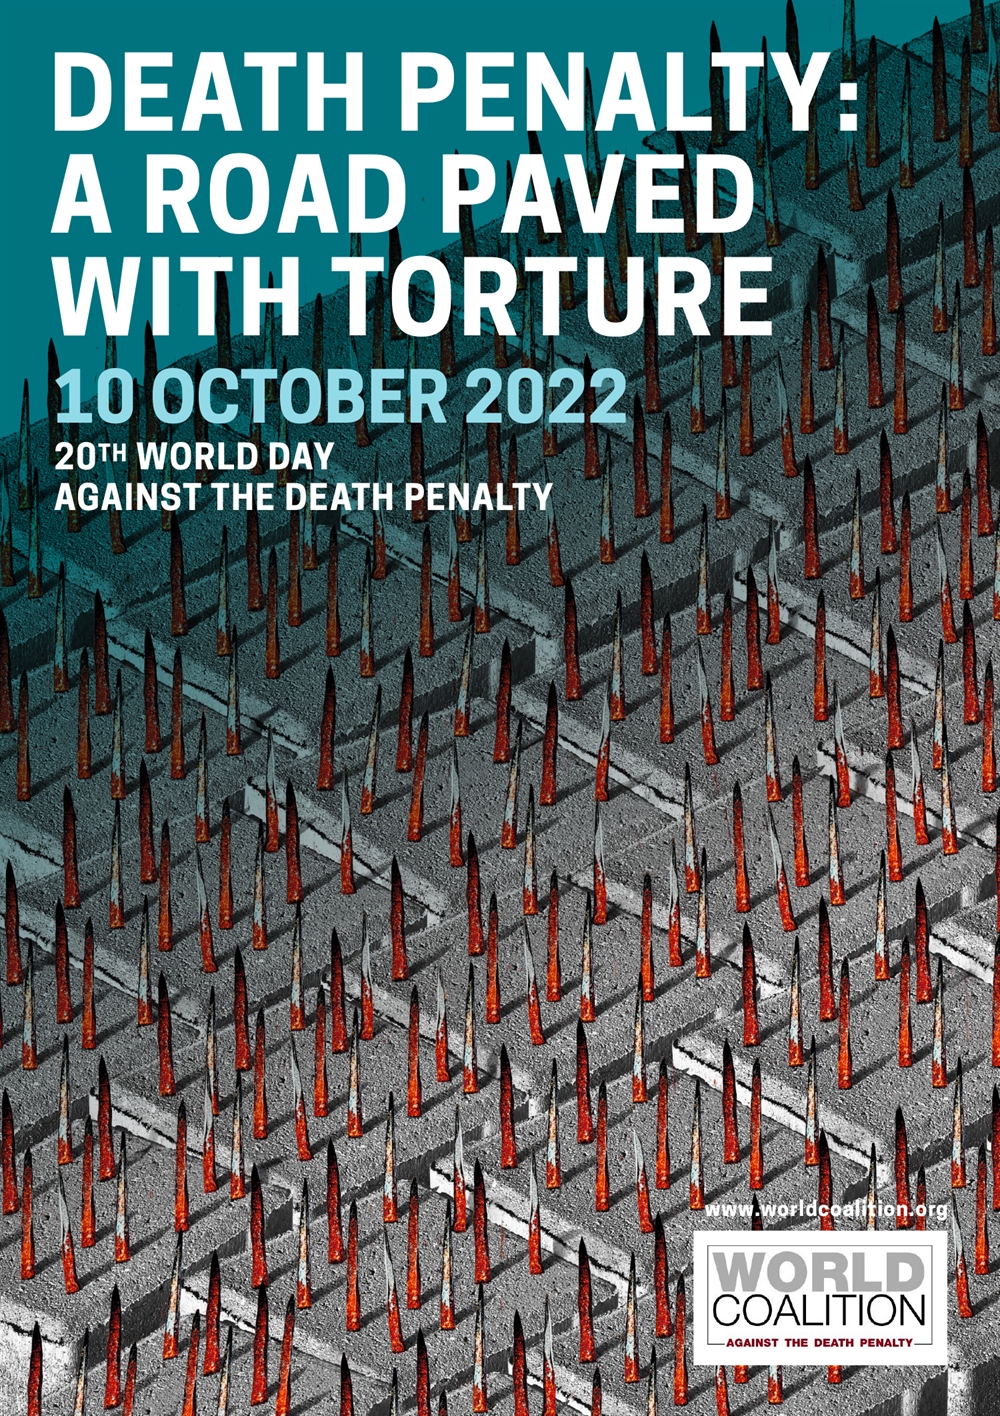 Drawing of field of bloody tacks. Text reads: Death penalty: a road paved with torture, 10 October 2022, 20th World Day Against the Death Penalty